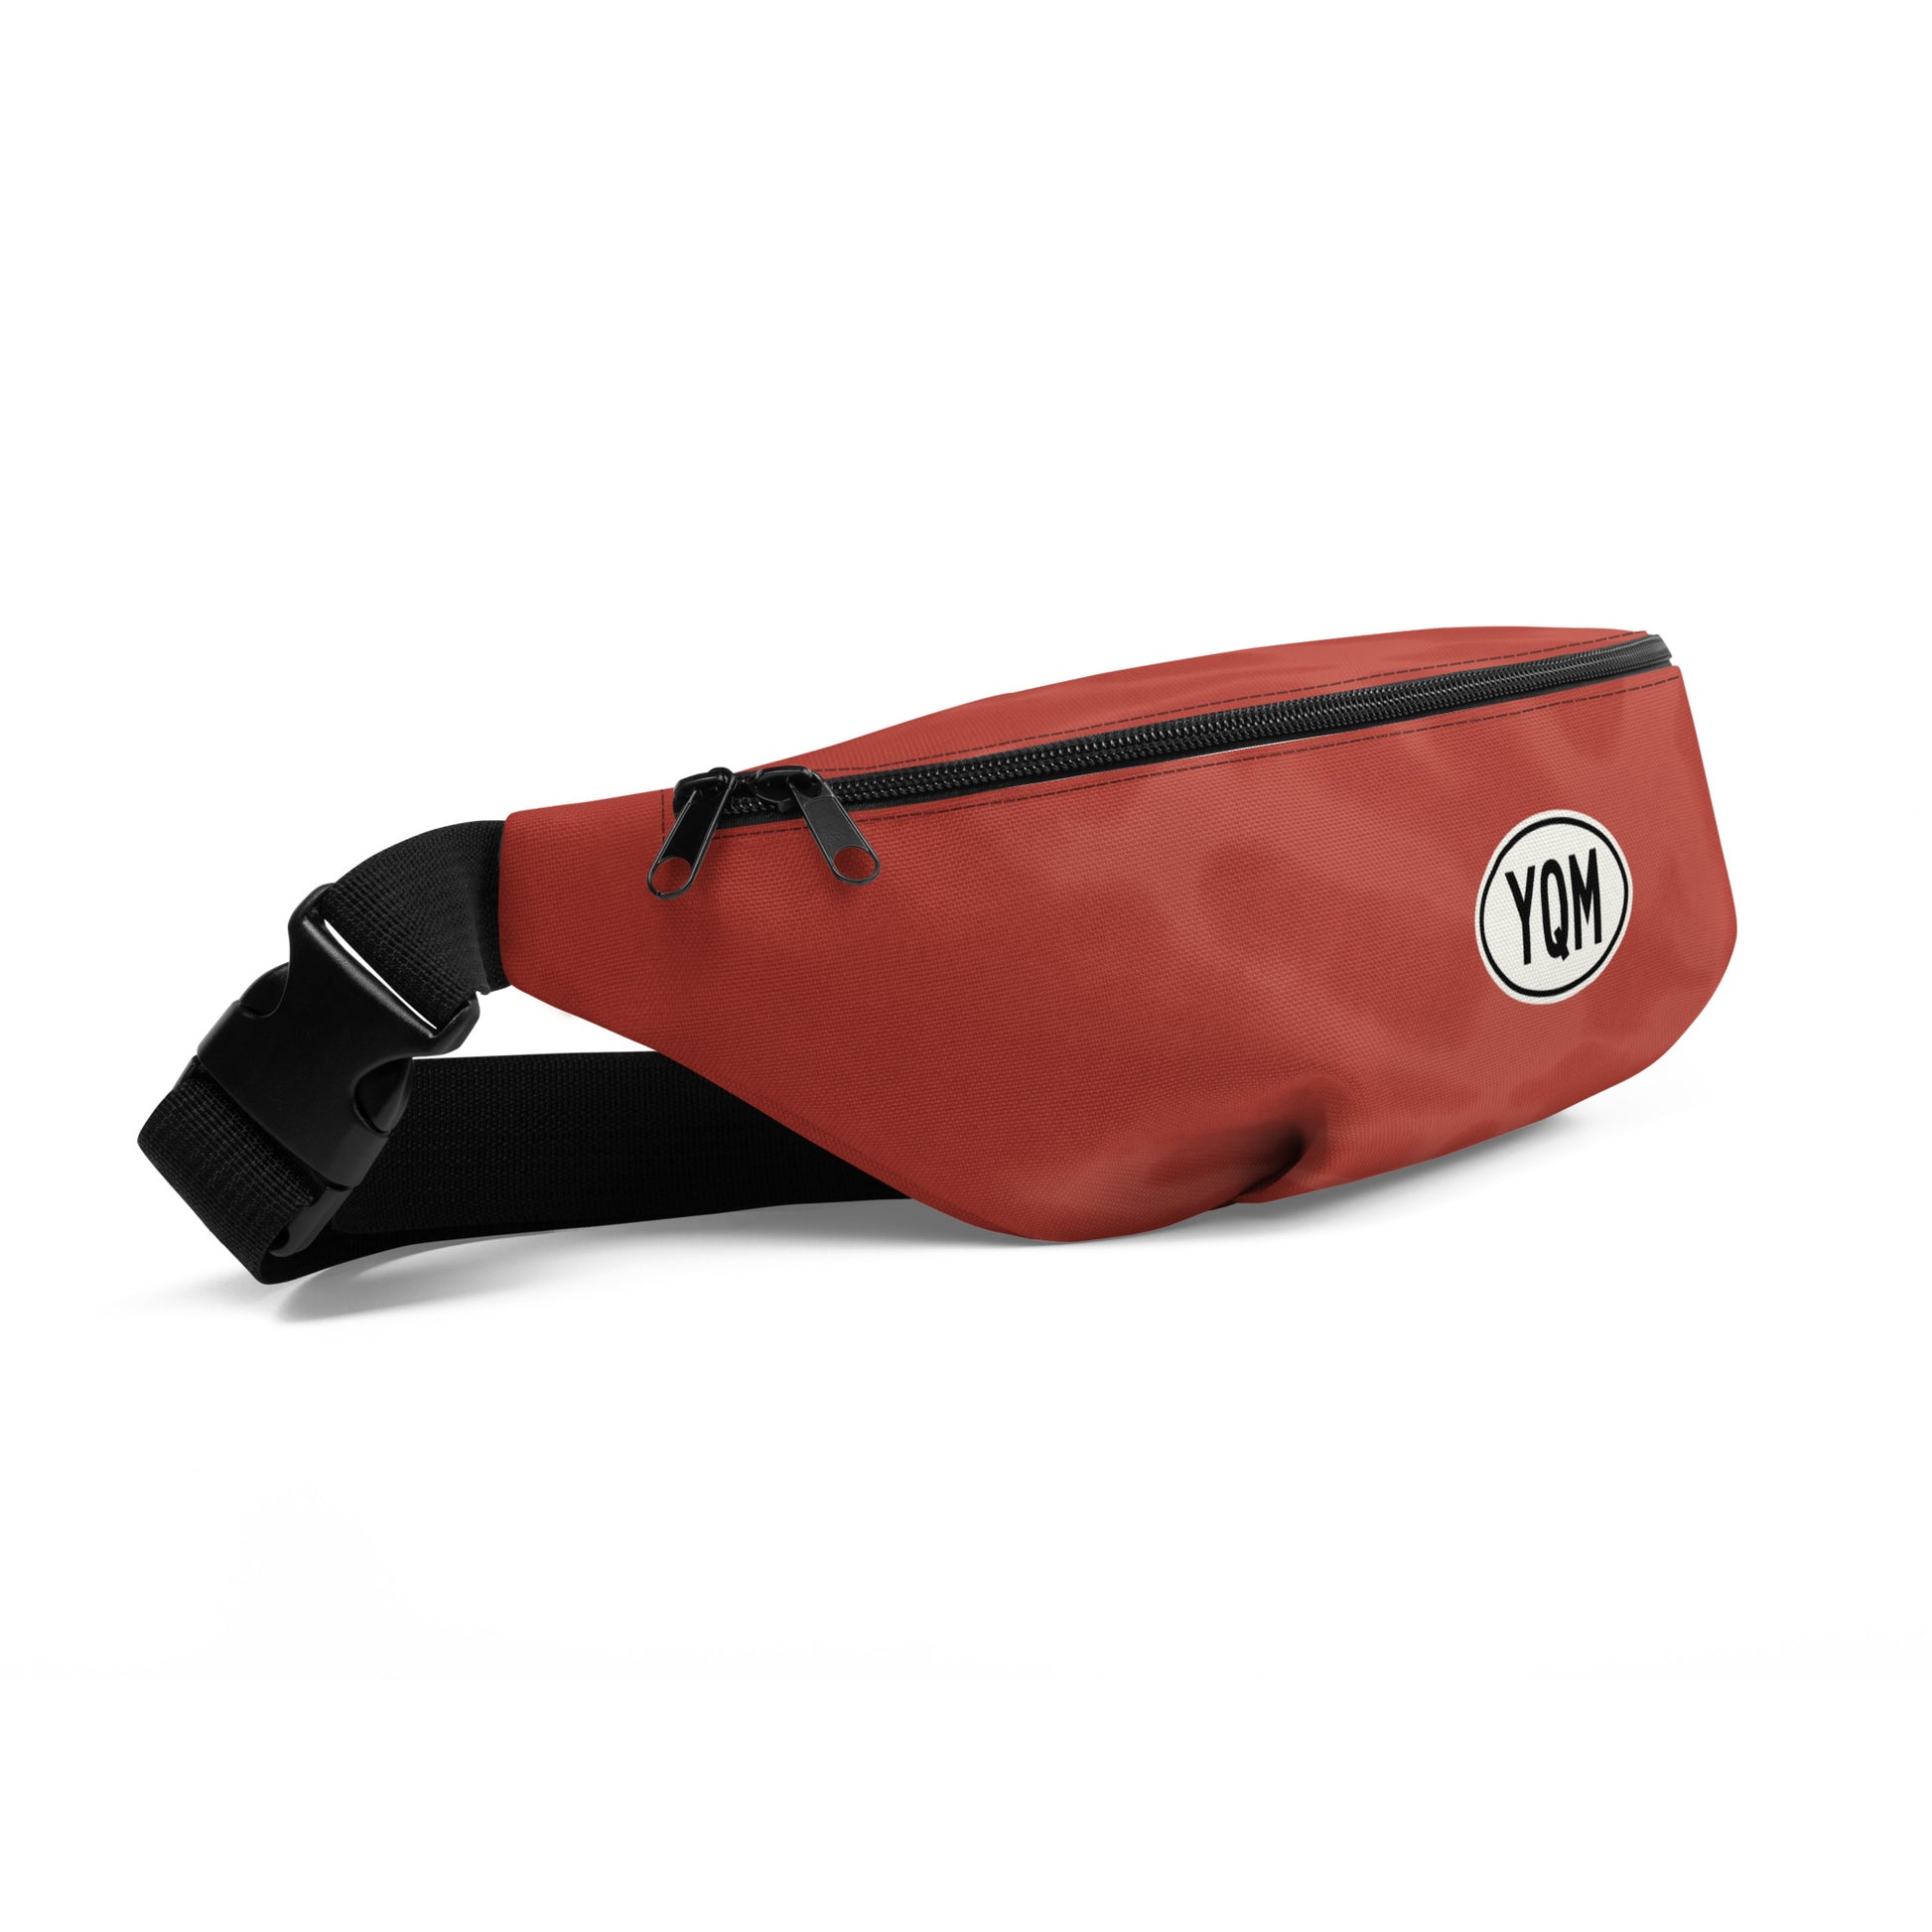 Travel Gift Fanny Pack - Red Tie-Dye • YQM Moncton • YHM Designs - Image 07